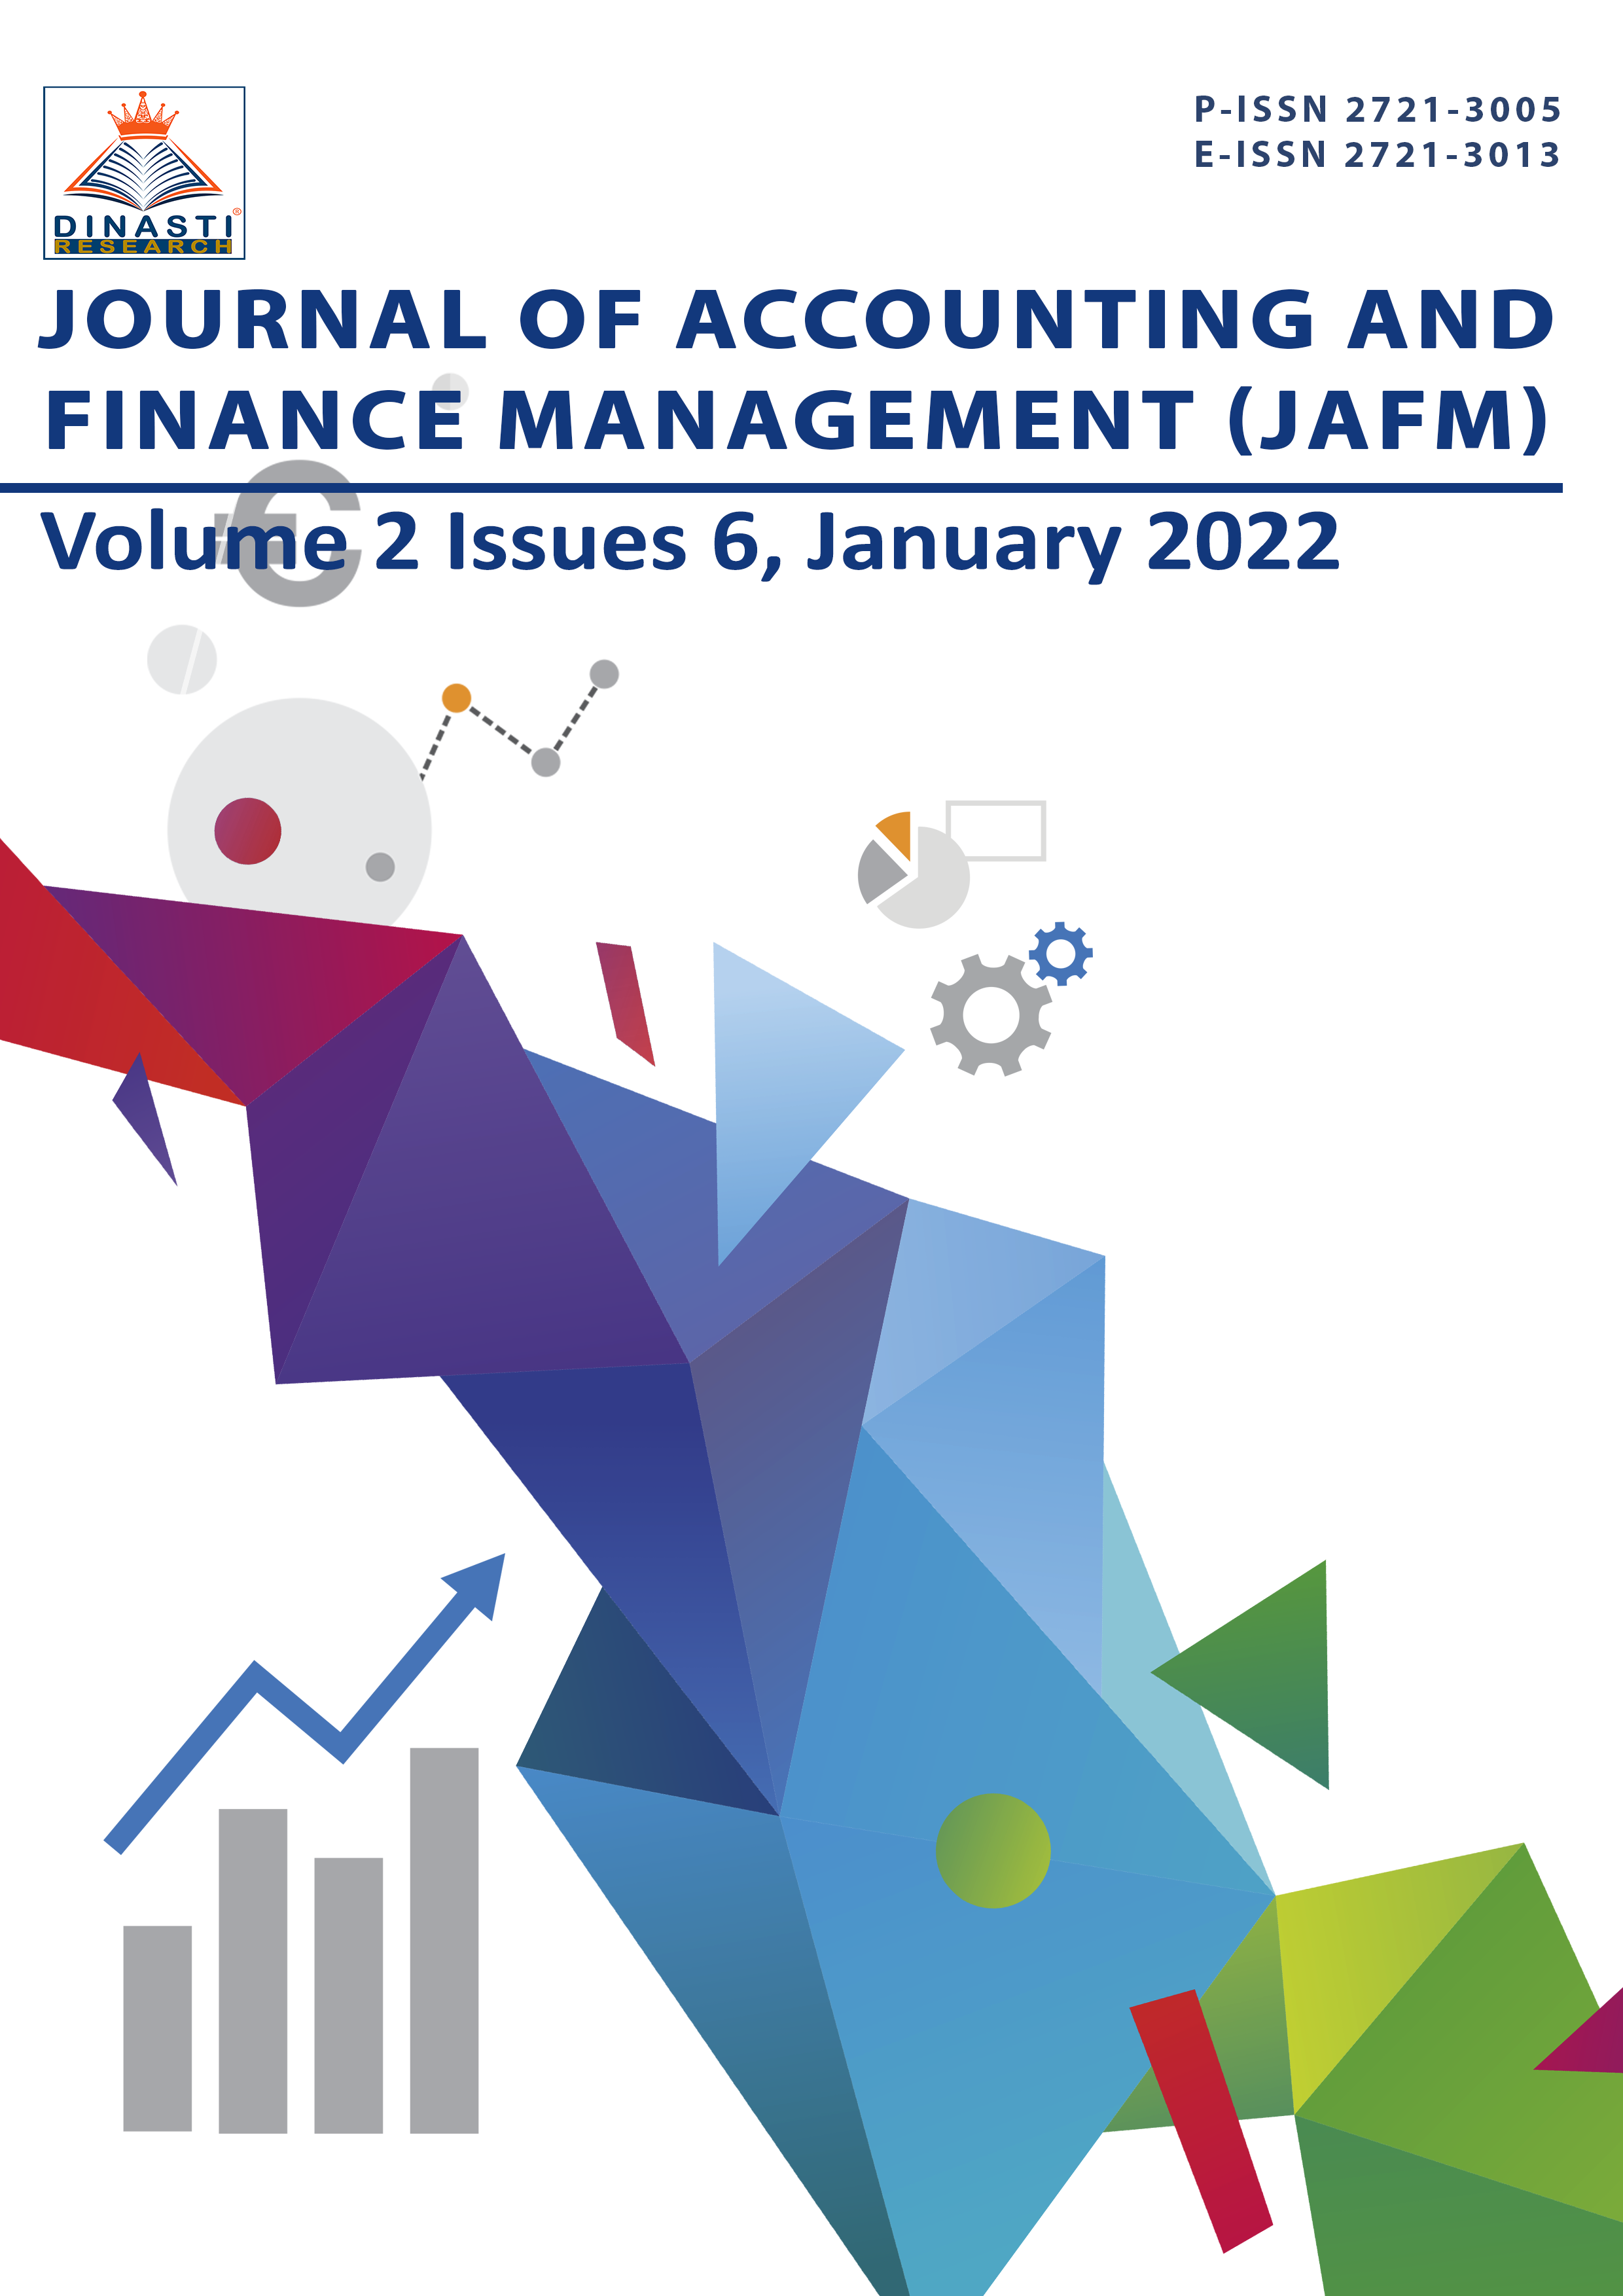 					View Vol. 2 No. 6 (2022): Journal of Accounting and Finance Management (January-February 2022)
				